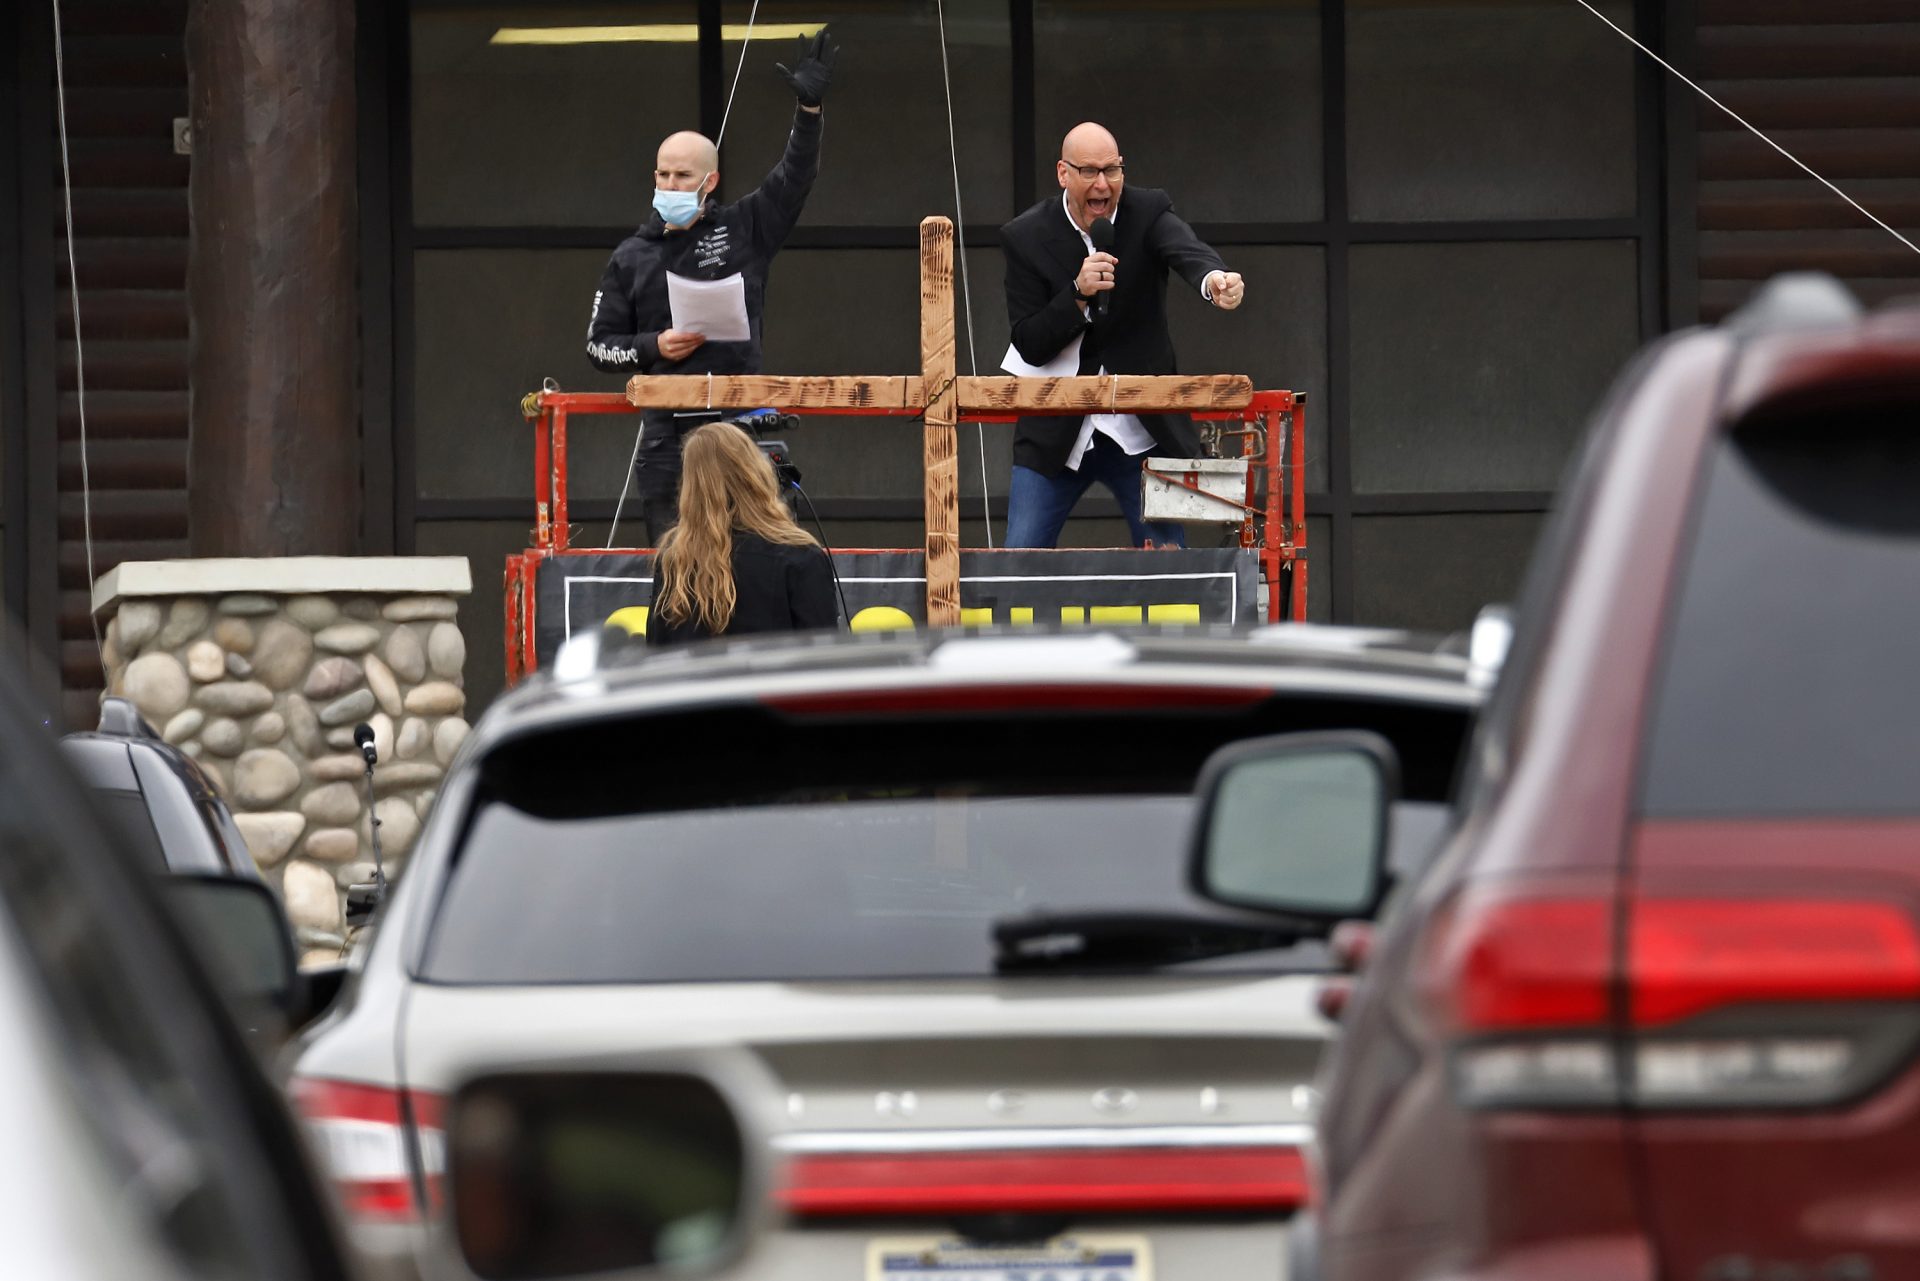 Pastor Bruce Schafer, top right, preaches from a scissor lift during the first of two drive-in Easter services held by Grace Life Church in a parking lot in Monroeville, Pa., Sunday, April 12, 2020.